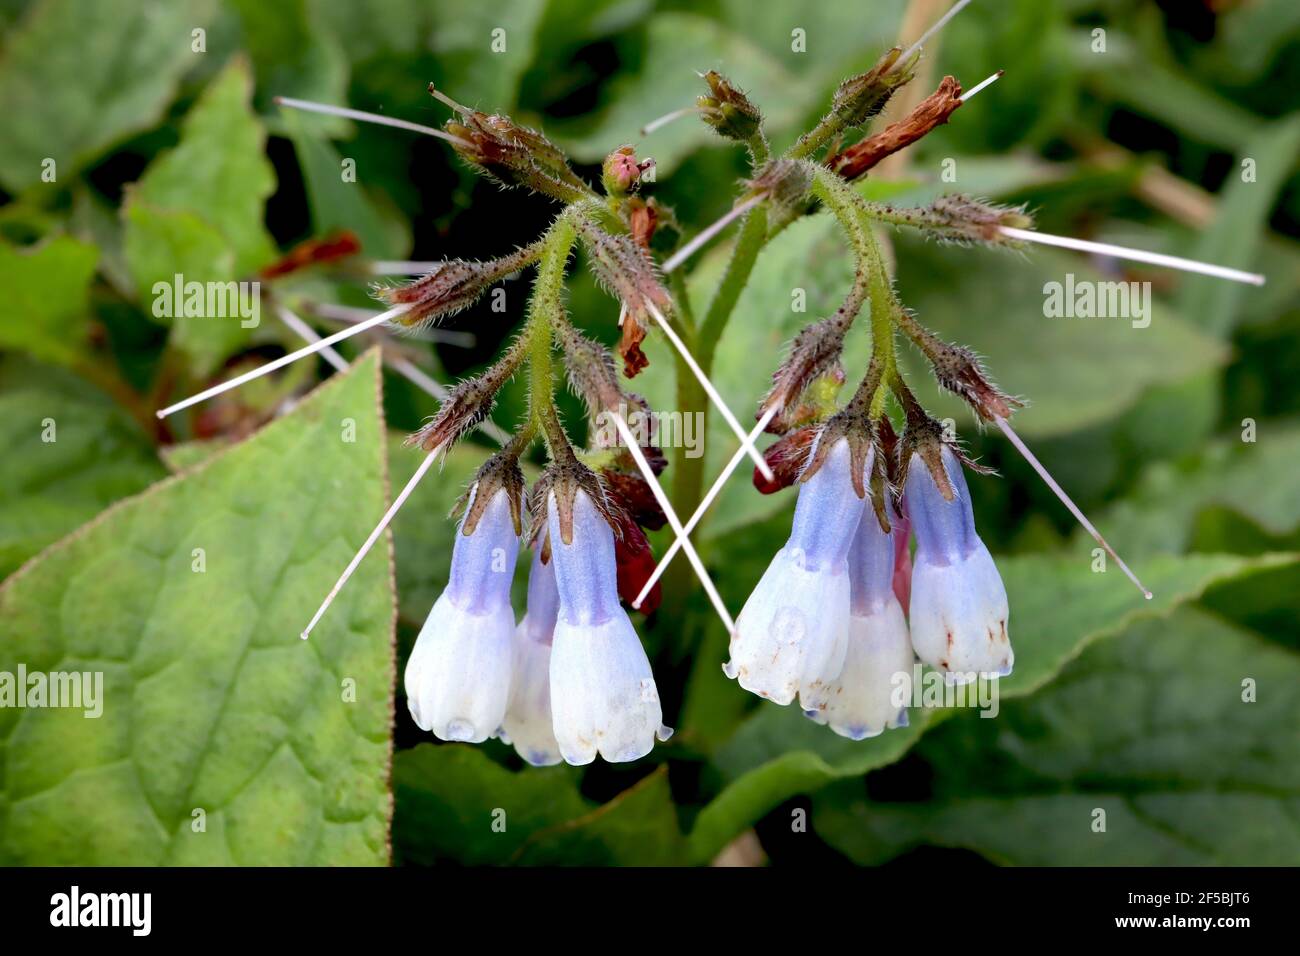 Symphytum ibericum ‘Wisley Blue’ Iberian comfrey Wisley Blue – arching clusters of blue and white bell-shaped flowers,   March, England, UK Stock Photo